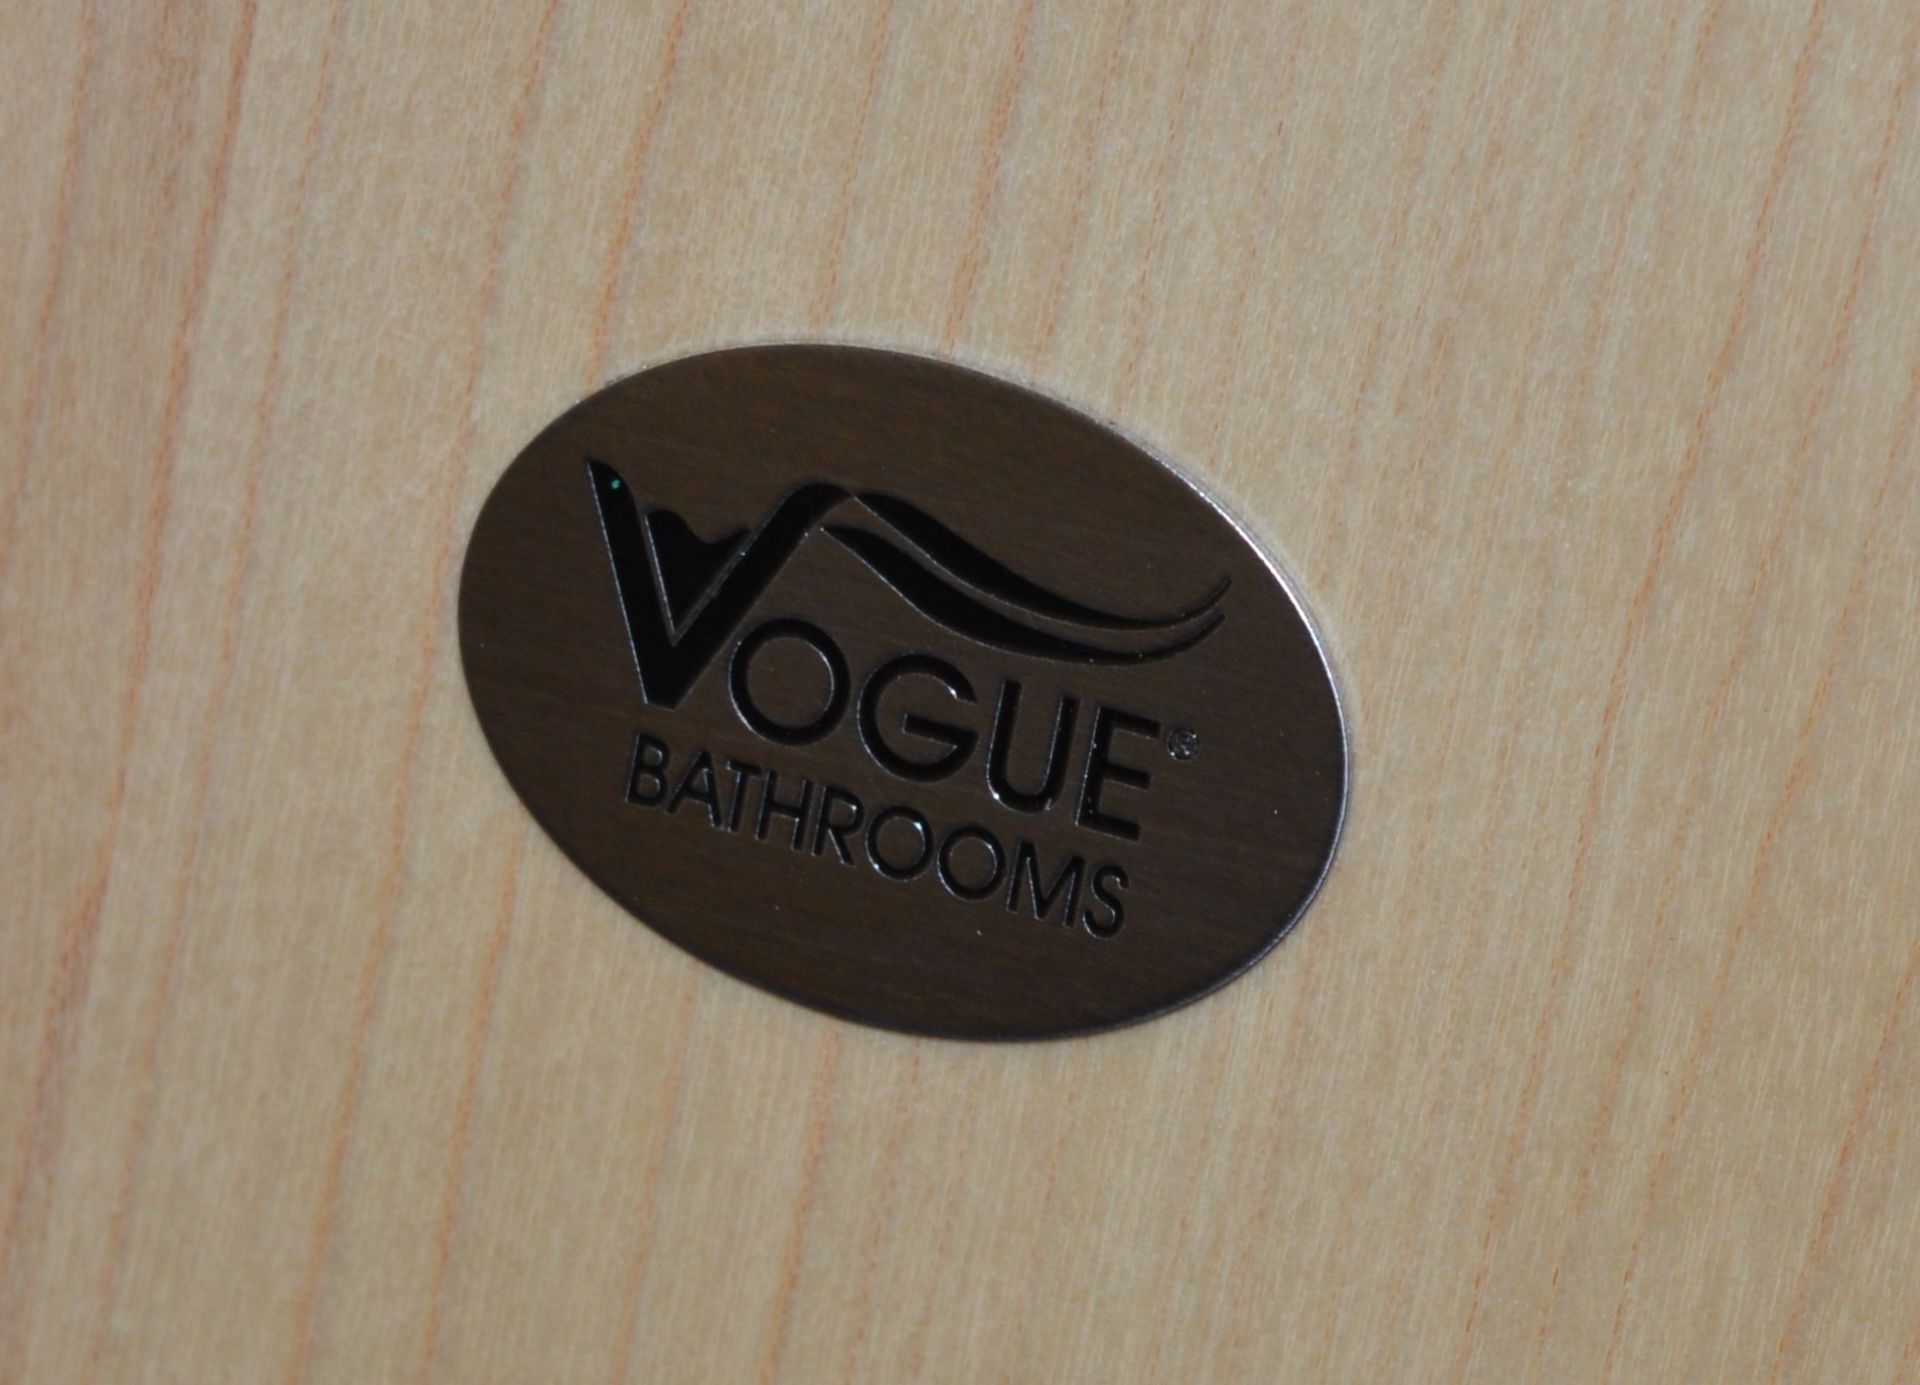 5 x Shaker Maple Wooden Toilet Seats With Chrome Fittings - Type VFM08 - High Quality Vogue - Image 5 of 5